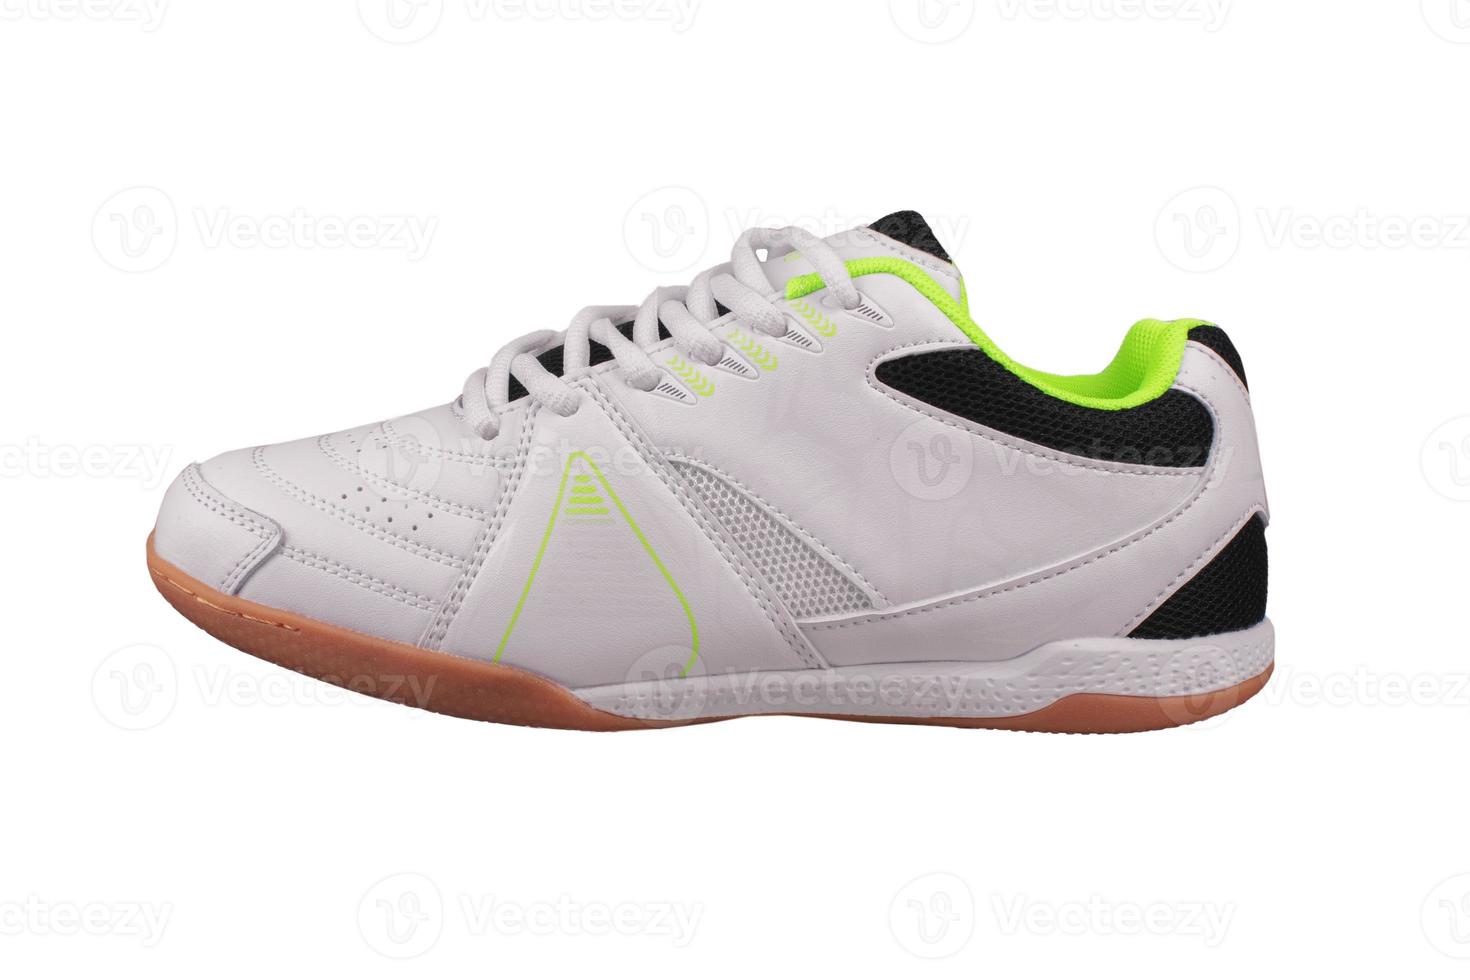 White sneaker with black inserts on a white background. photo